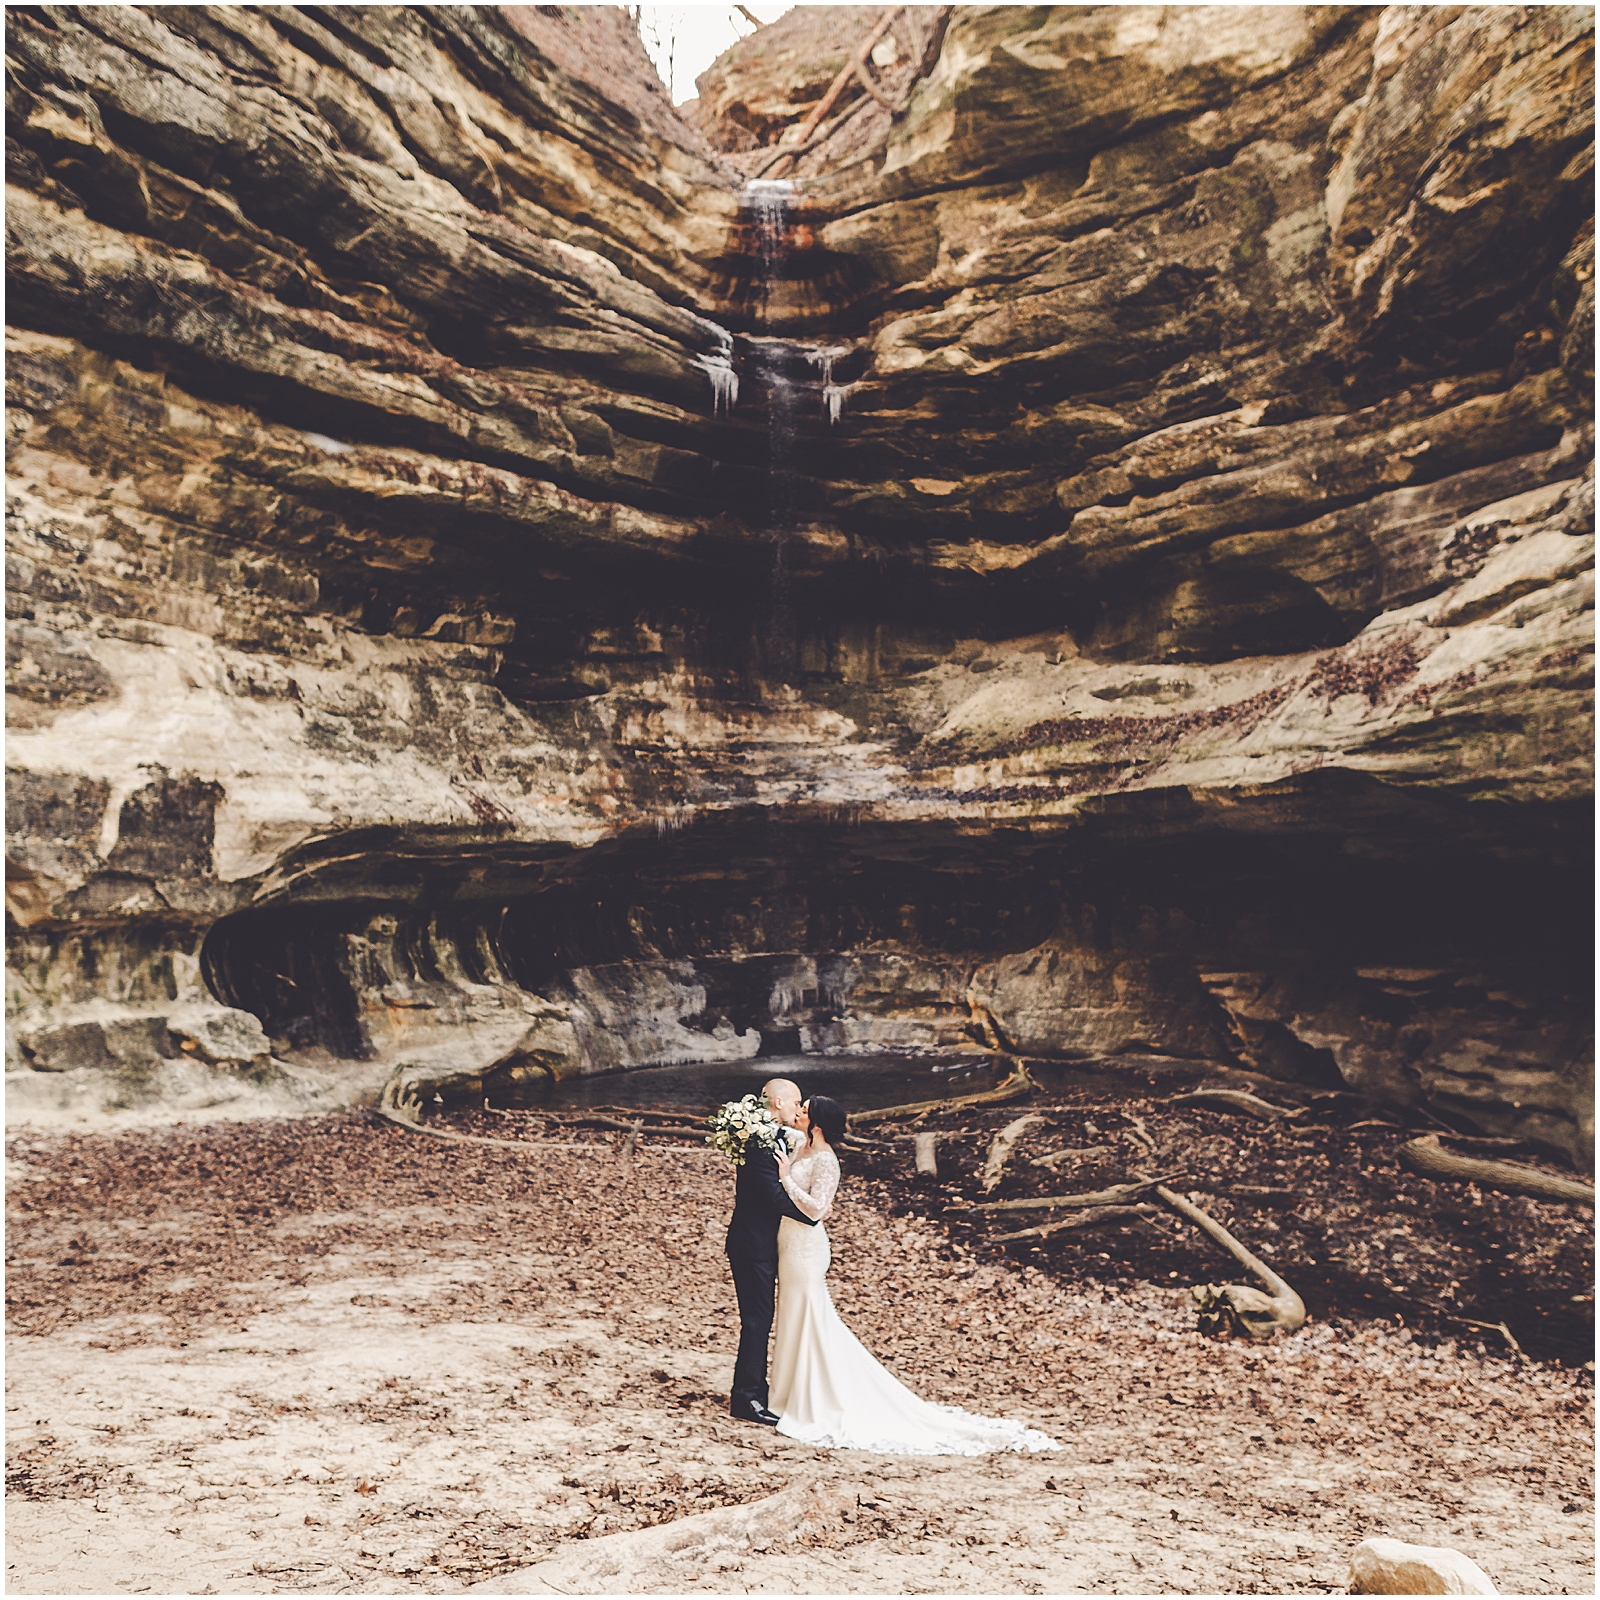 Winter Starved Rock Lodge wedding in Oglesby, Illinois with Chicagoland wedding photographer Kara Evans Photographer.